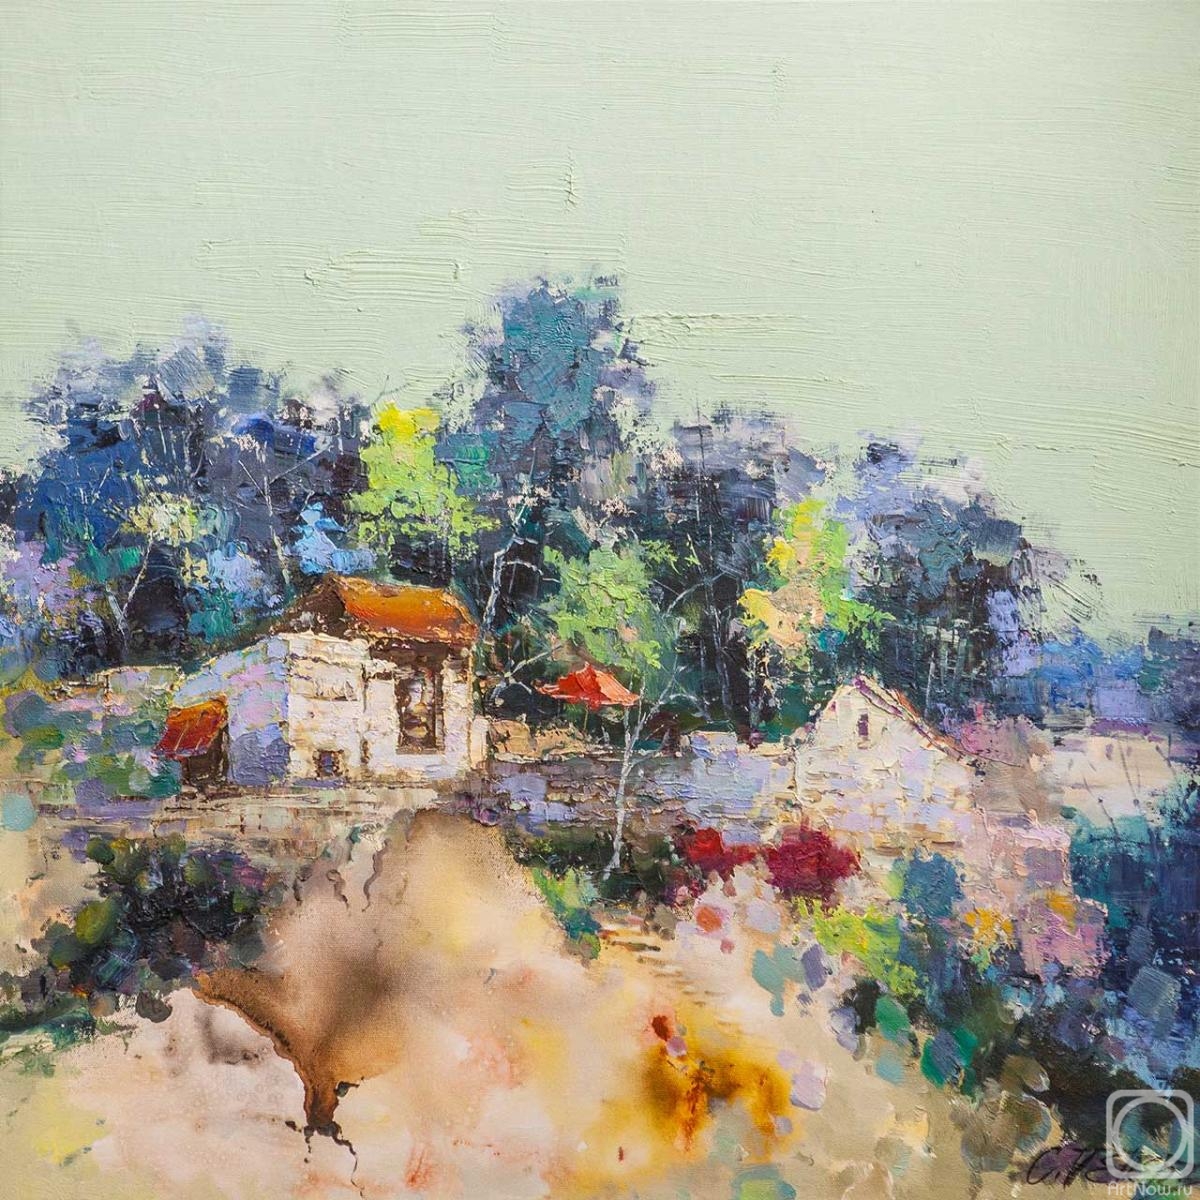 Vevers Christina. Blooming Mediterranean. Houses on the hill